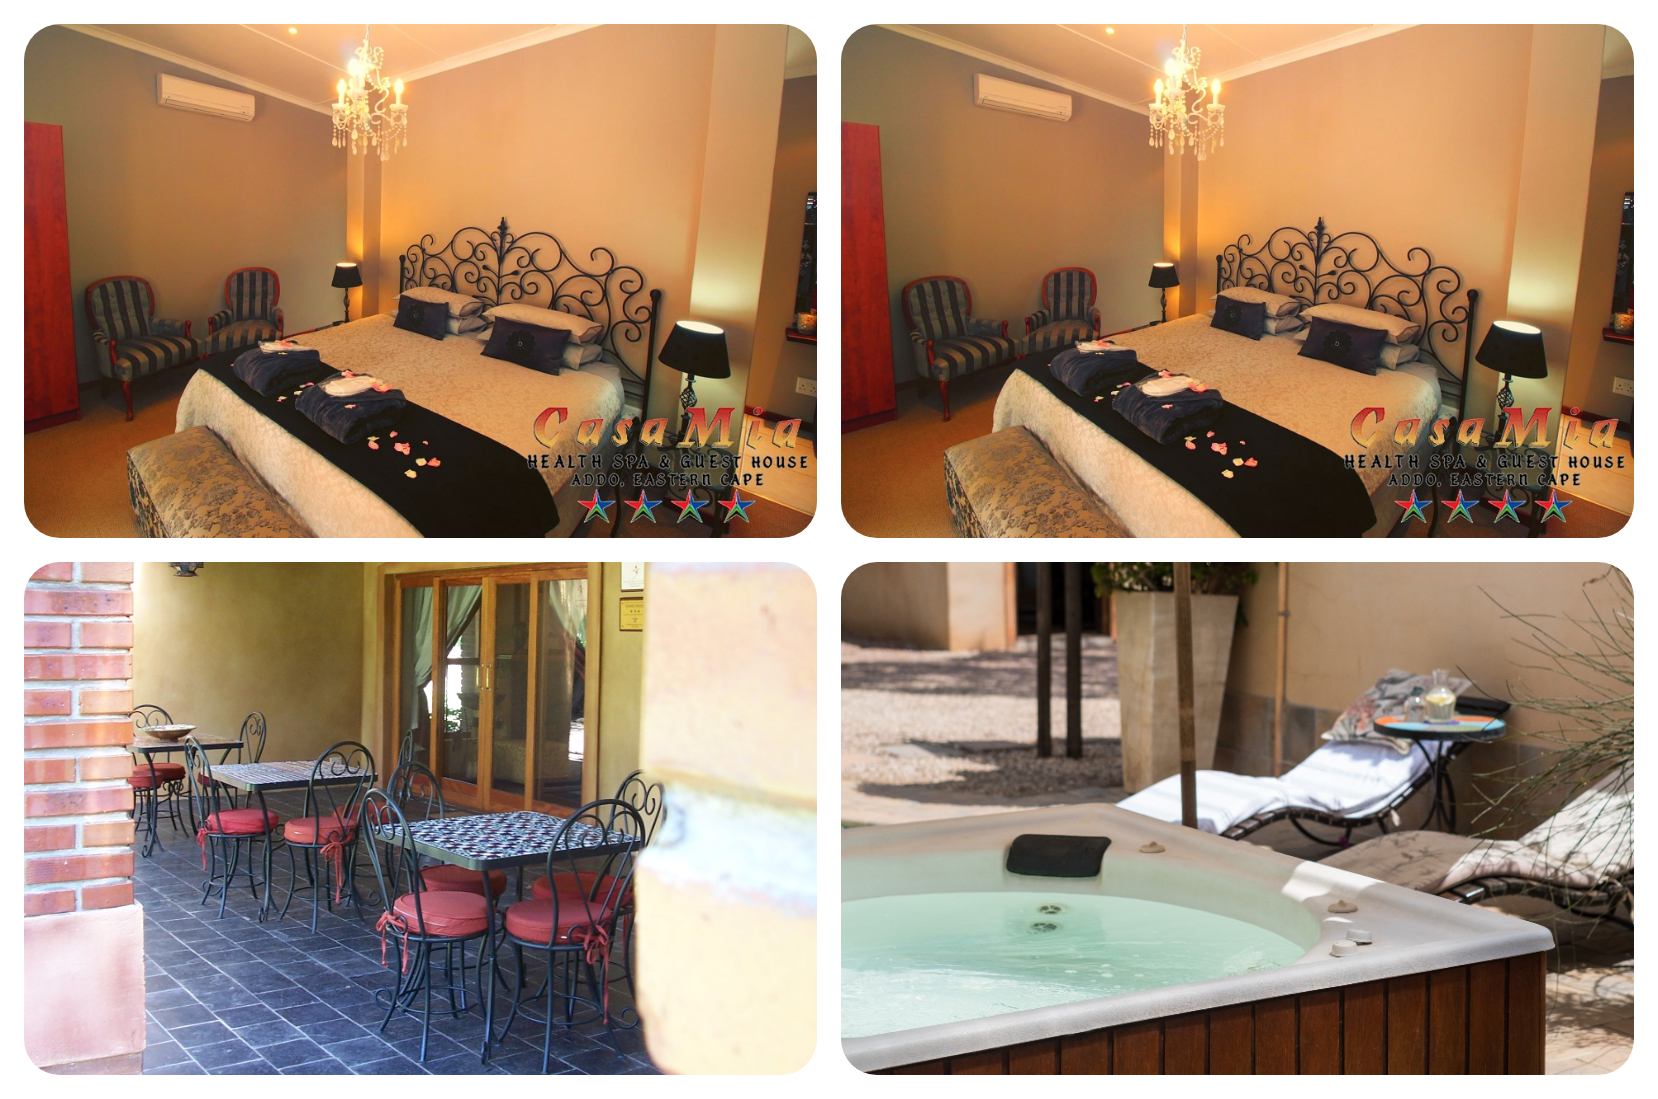 casa mia health spa and guesthouse